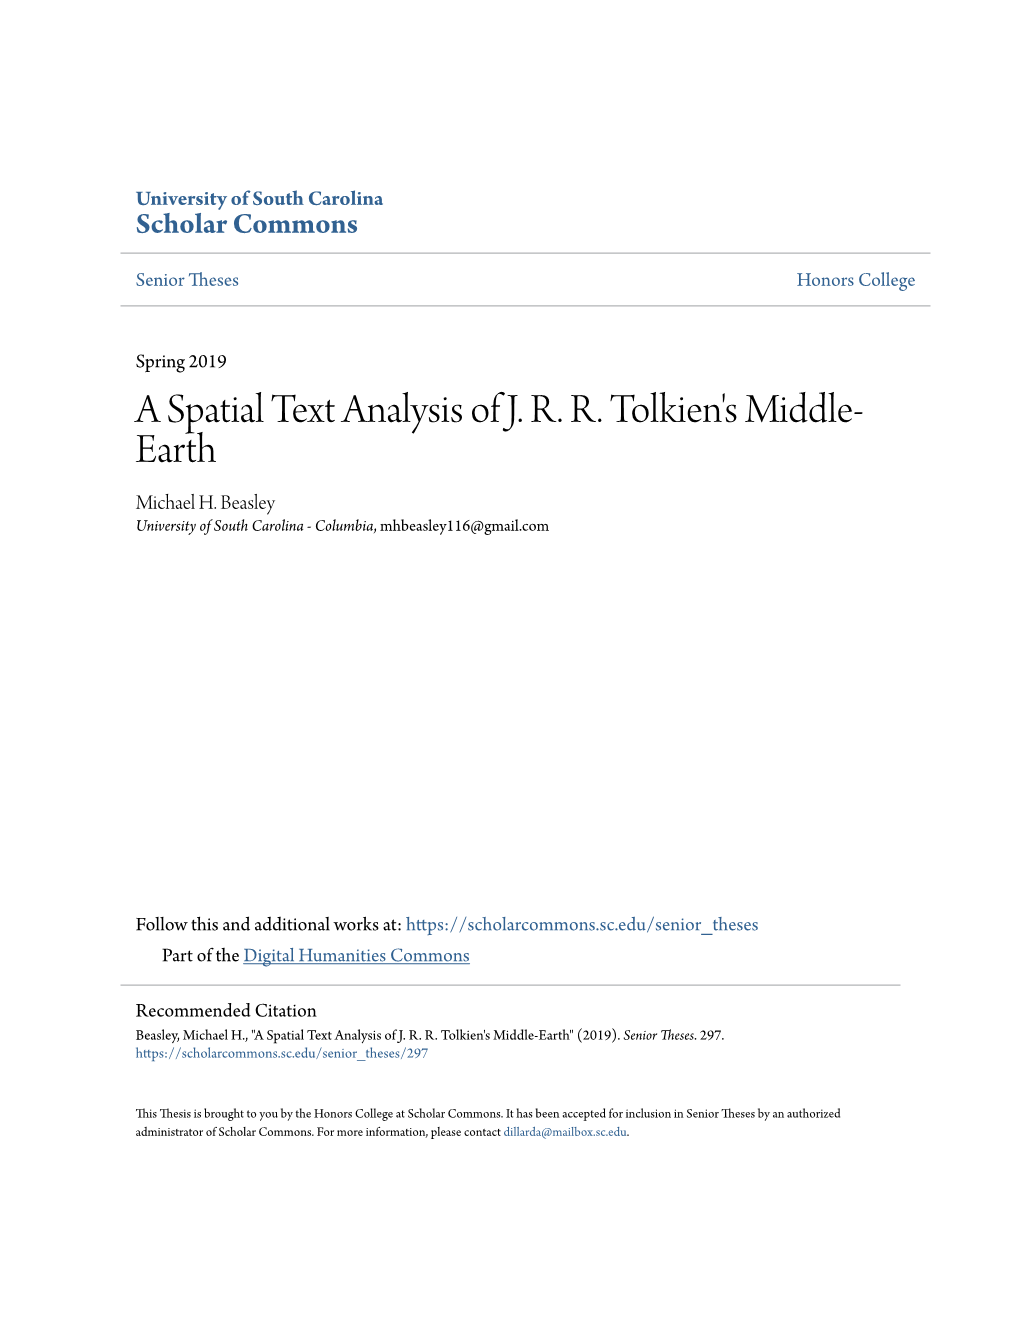 A Spatial Text Analysis of J. R. R. Tolkien's Middle-Earth" (2019)